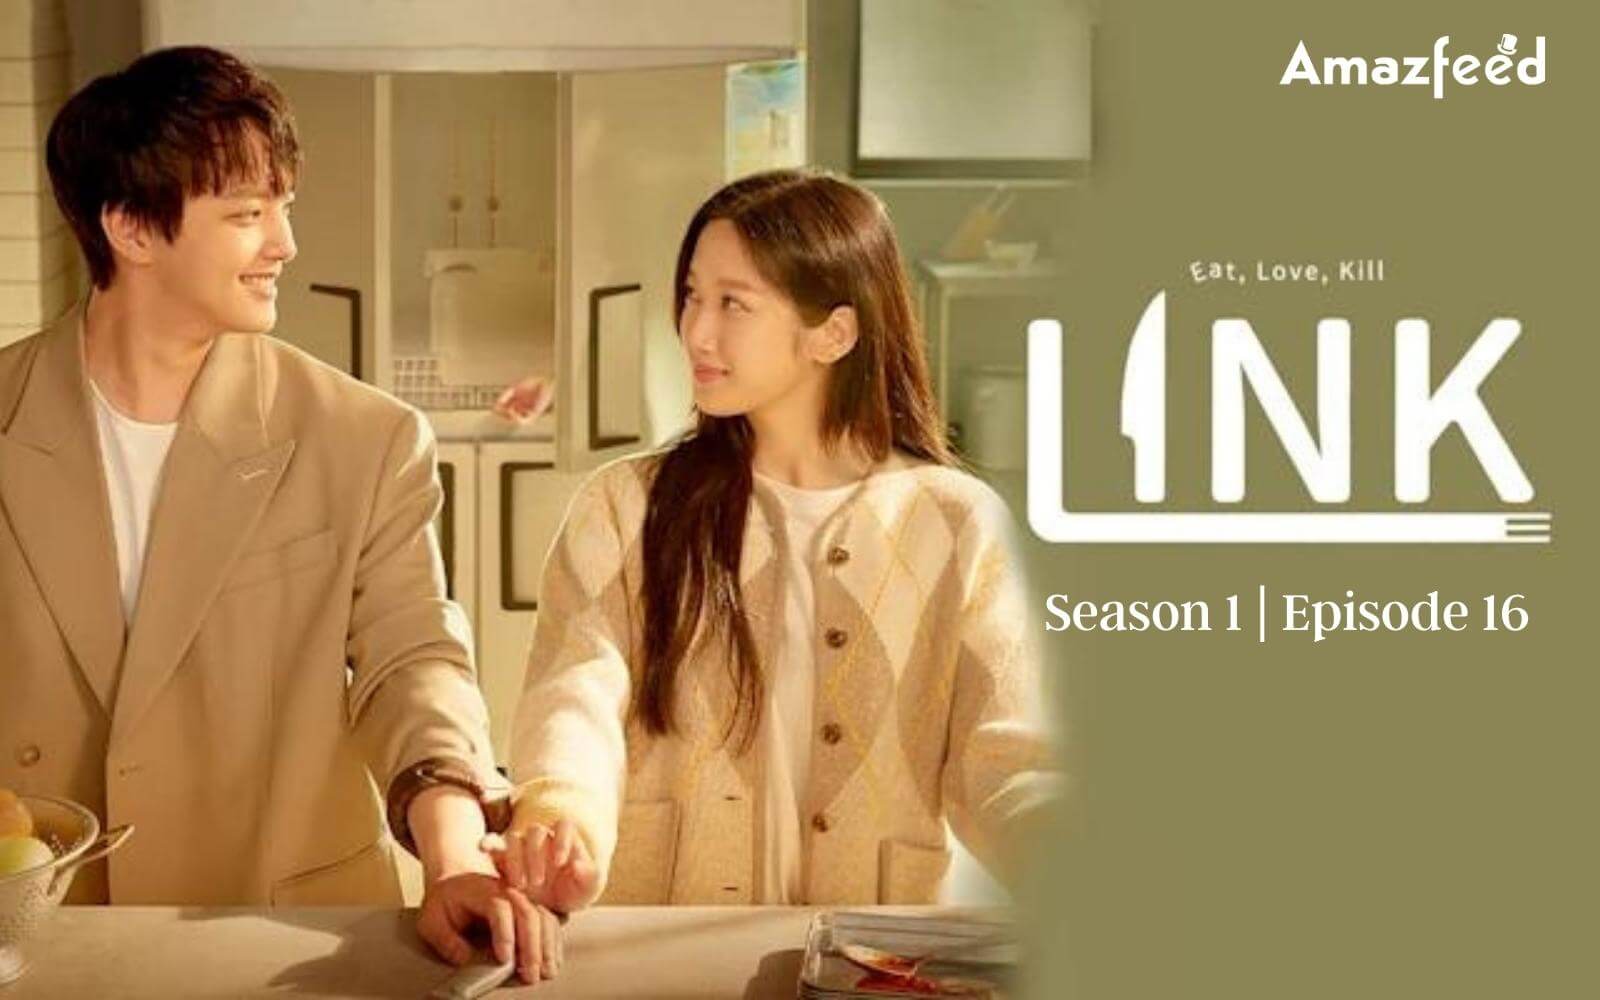 Link: Eat, Love, Kill Season 1 Episode 16: Countdown, Release Date, Spoiler, and Cast Everything You Need To Know